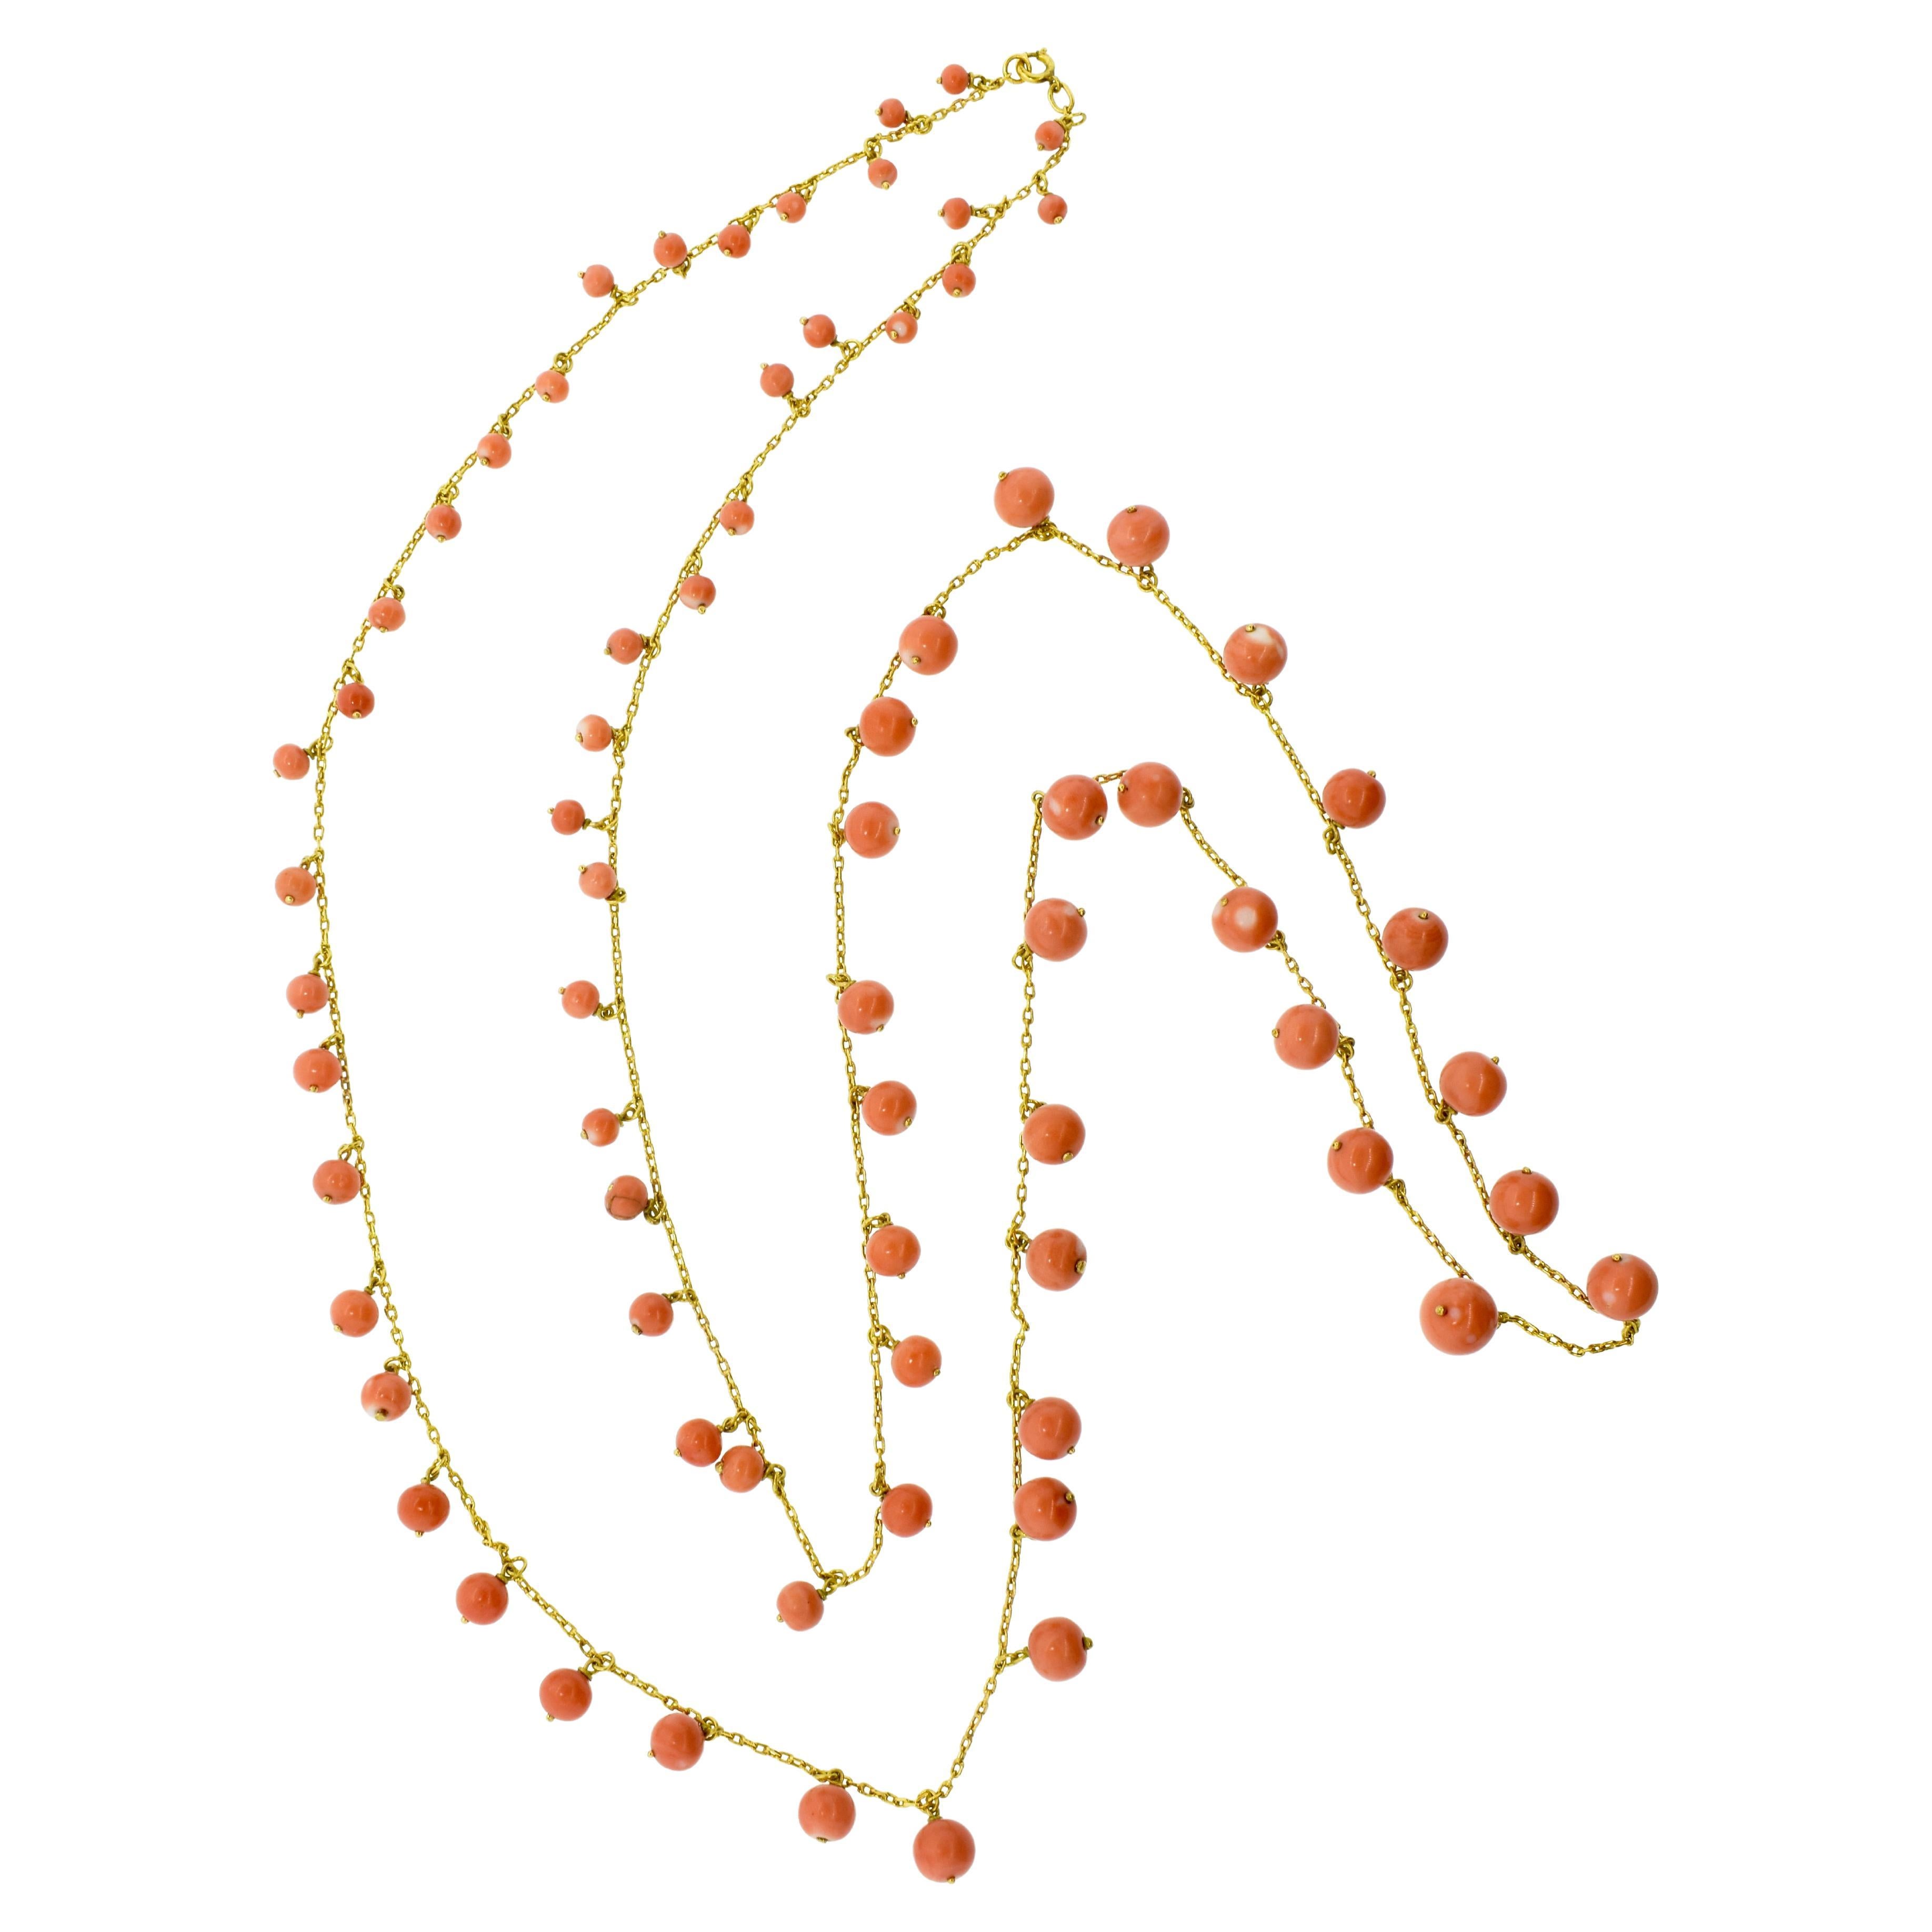 Victorian Long Gold Chain with Coral Drops, circa 1880.